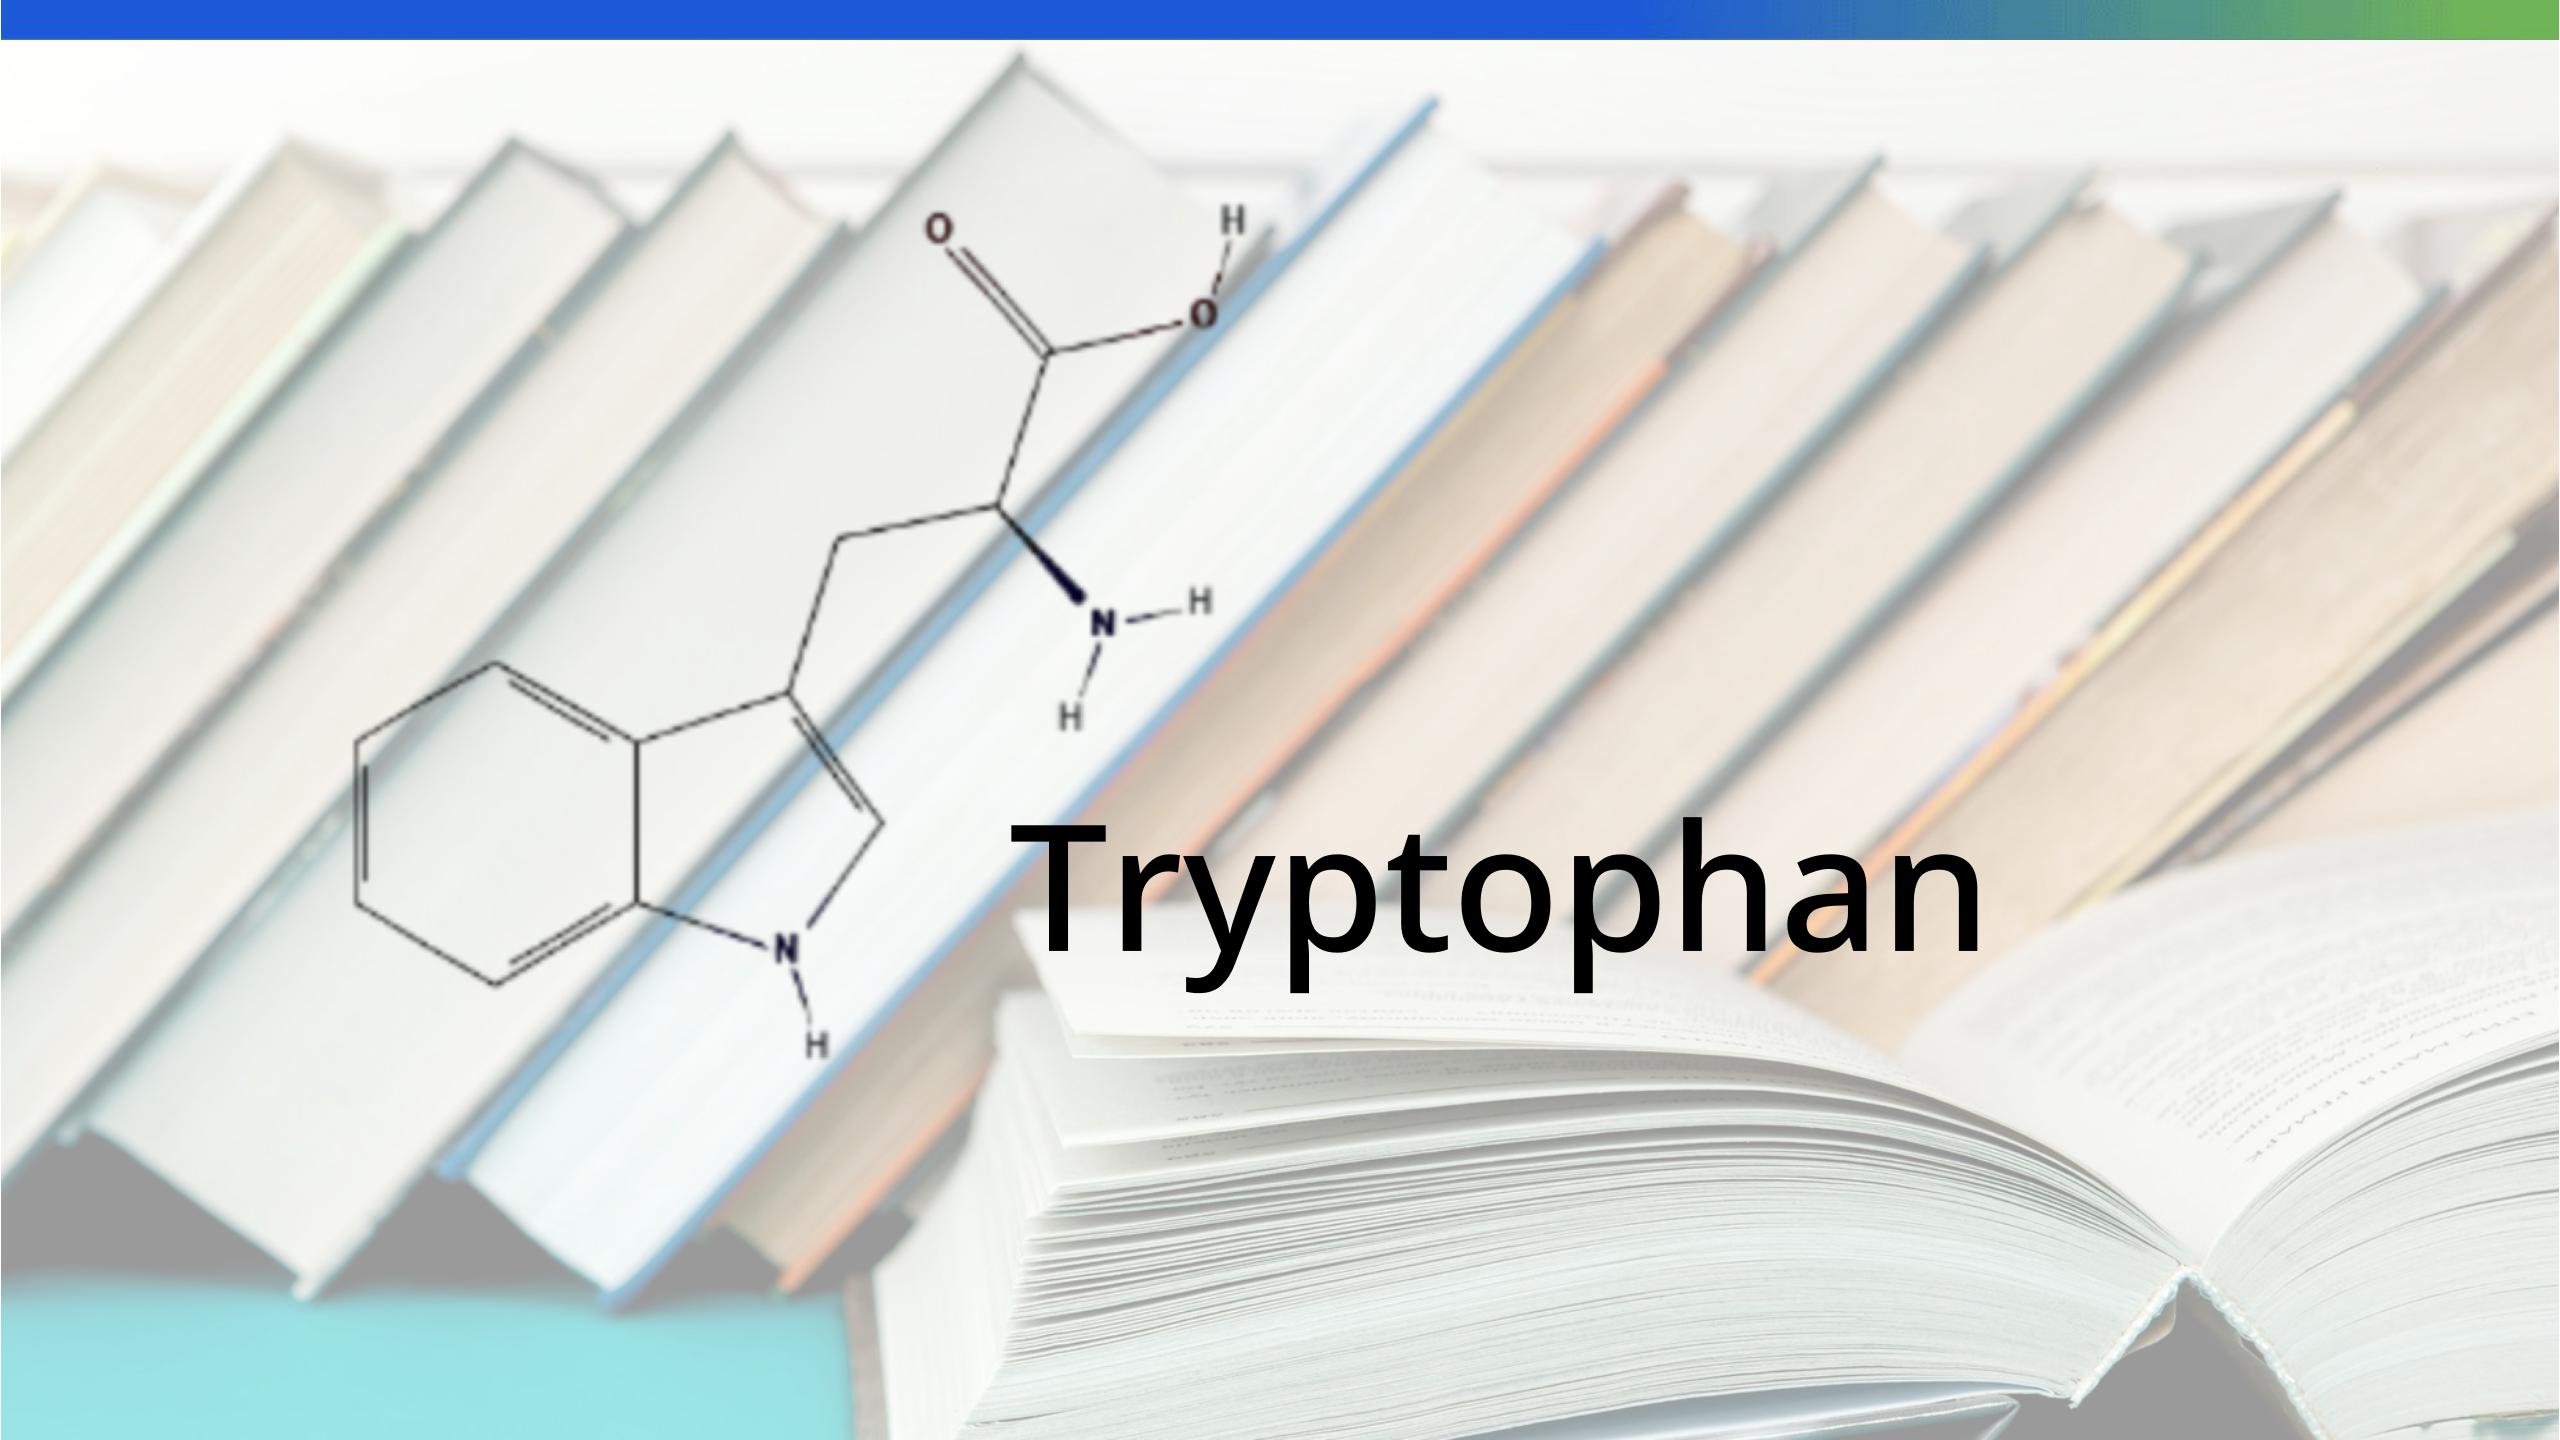 Tryptophan: Essential Amino Acid for Mood, Sleep, and More